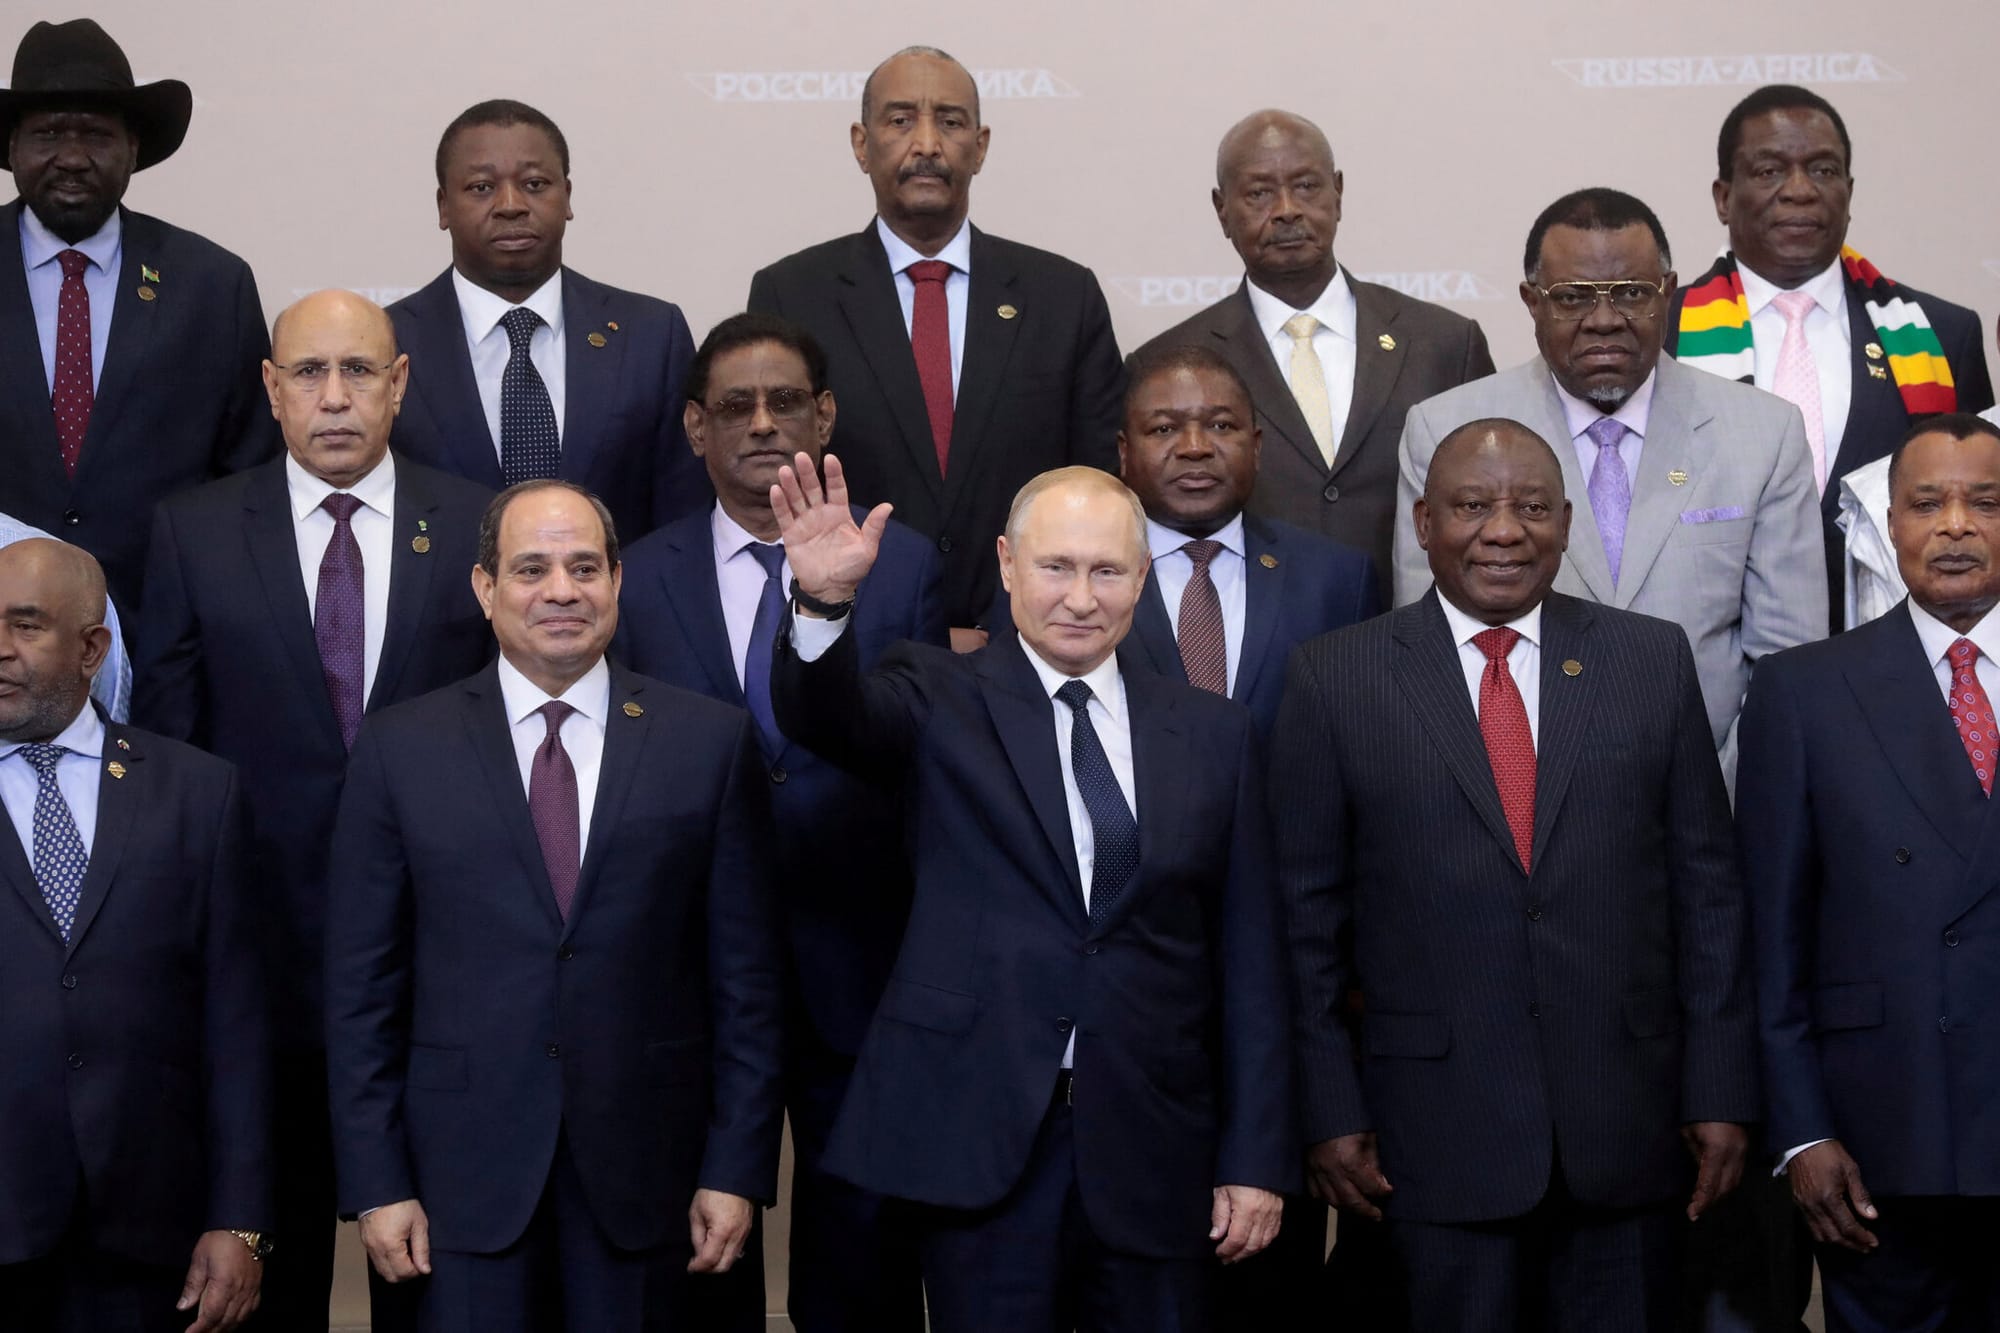 What is Russia doing in Africa and what's the issue with the US? Why Haiti is taking note